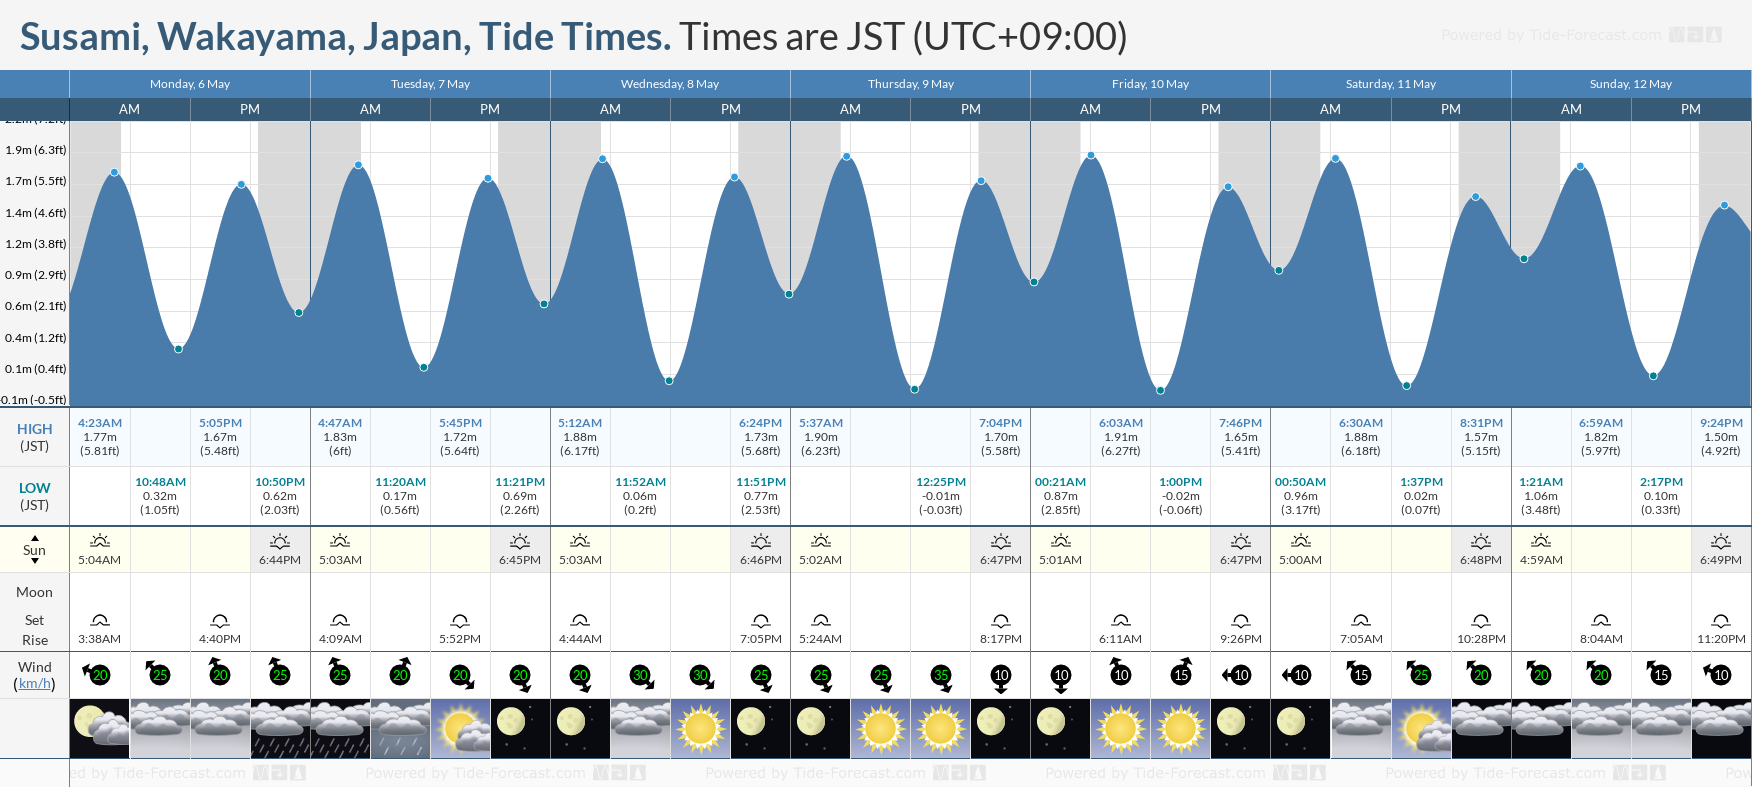 Susami, Wakayama, Japan Tide Chart including high and low tide tide times for the next 7 days